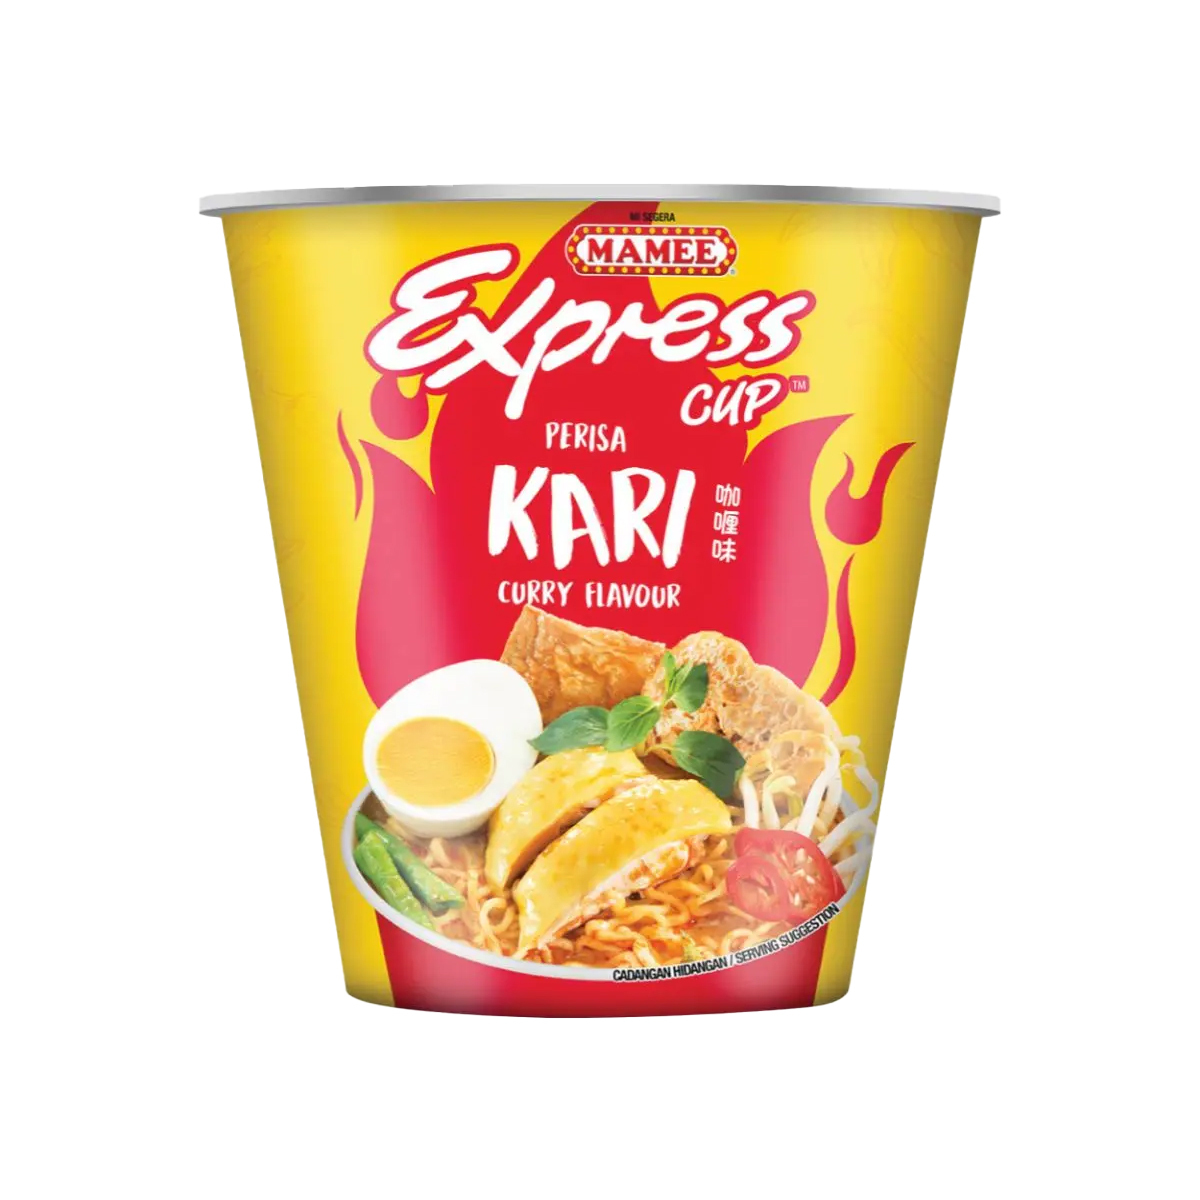 Mamee Express Cup Curry Flavour 60g